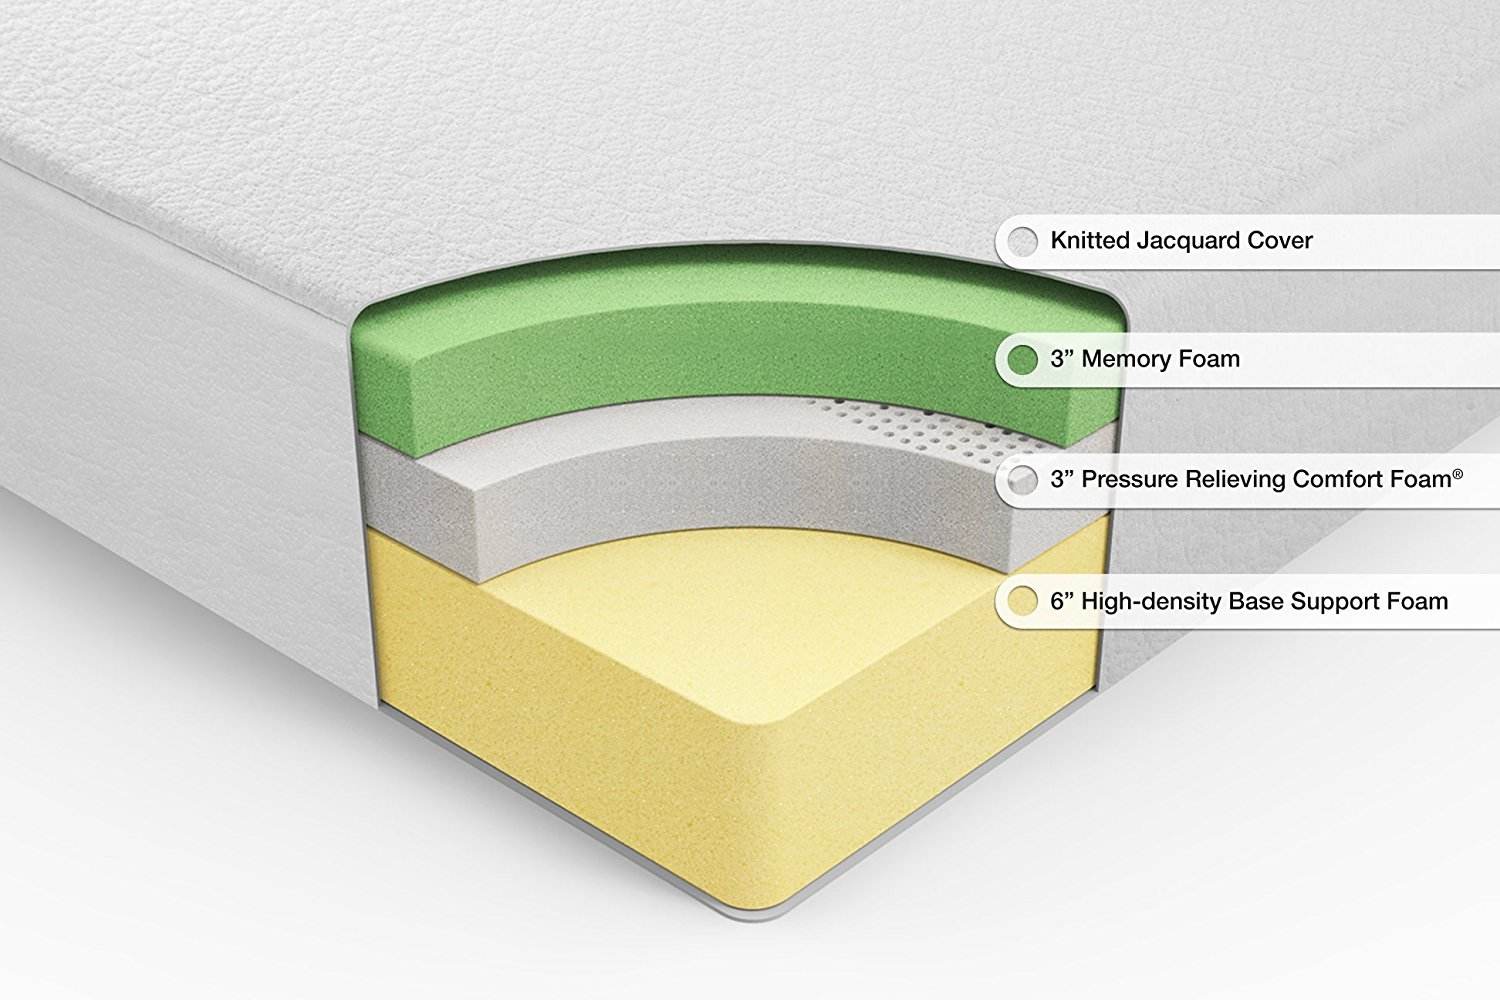 memory foam mattress layers are glued together